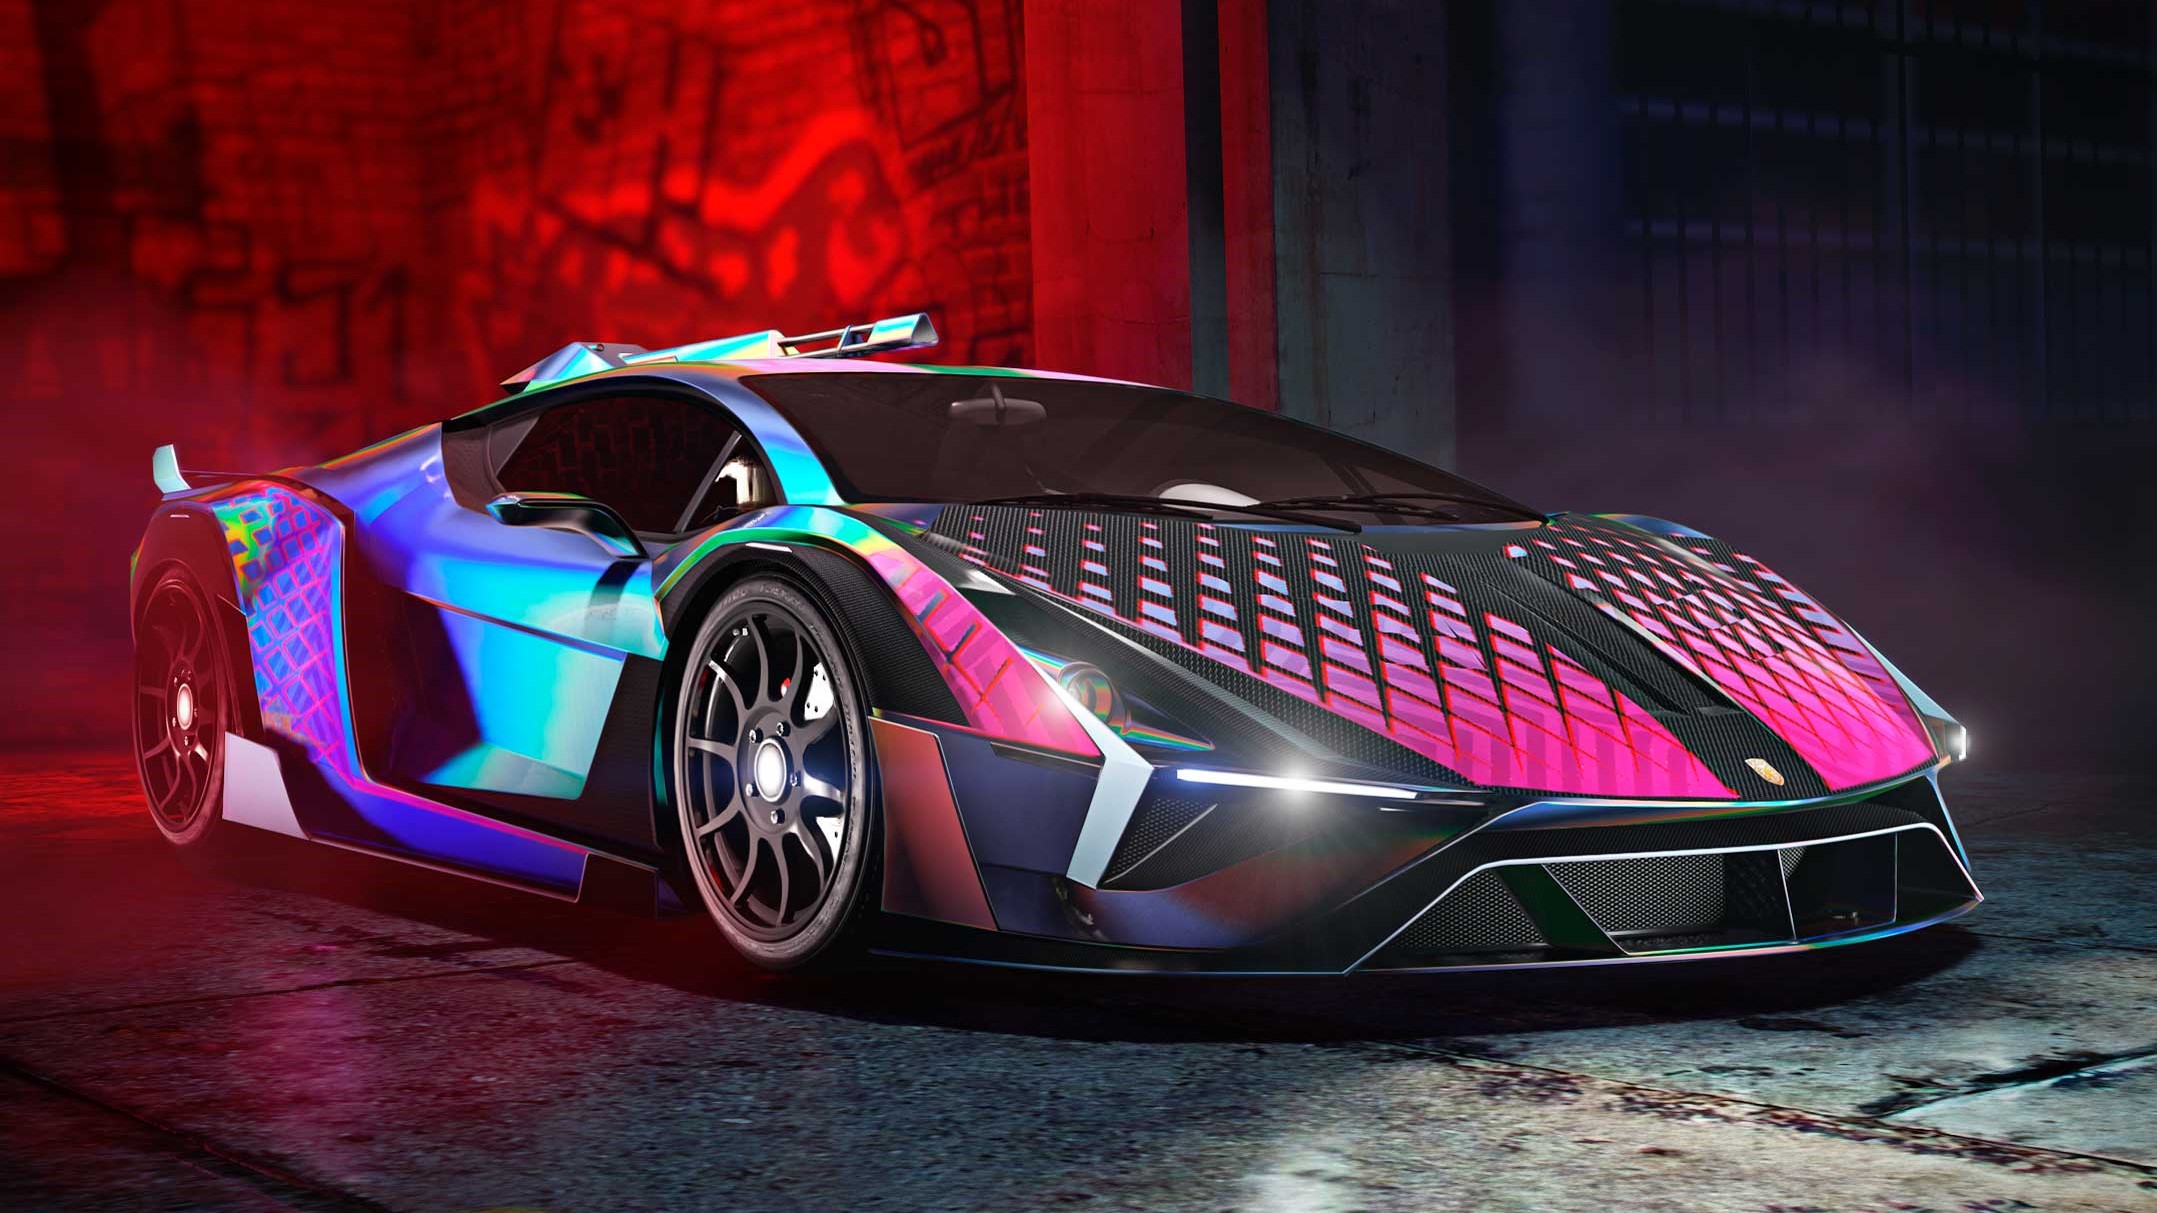 TechnoDriveIn: GRAND THEFT AUTO V TO HAVE CUSTOMISABLE CARS AND WEAPONS